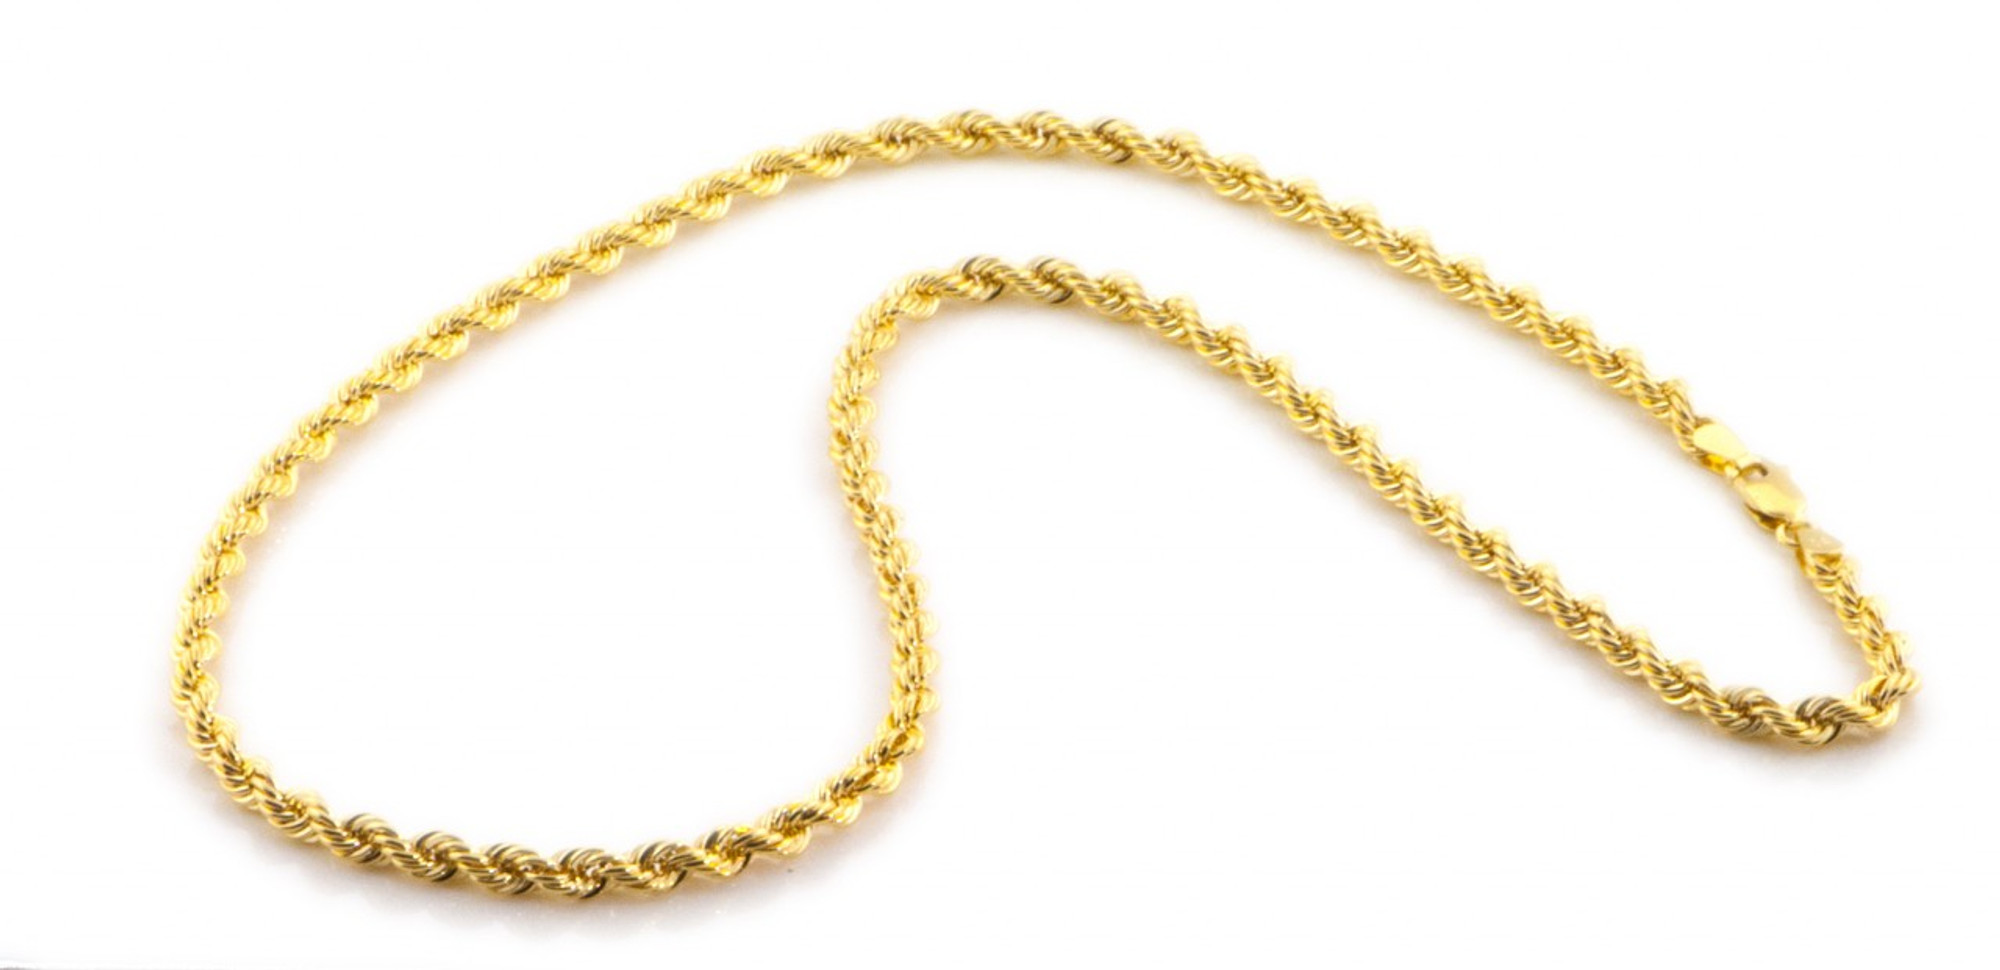 14K Yellow Gold 4mm Hollow Rope Chain 24 Inches